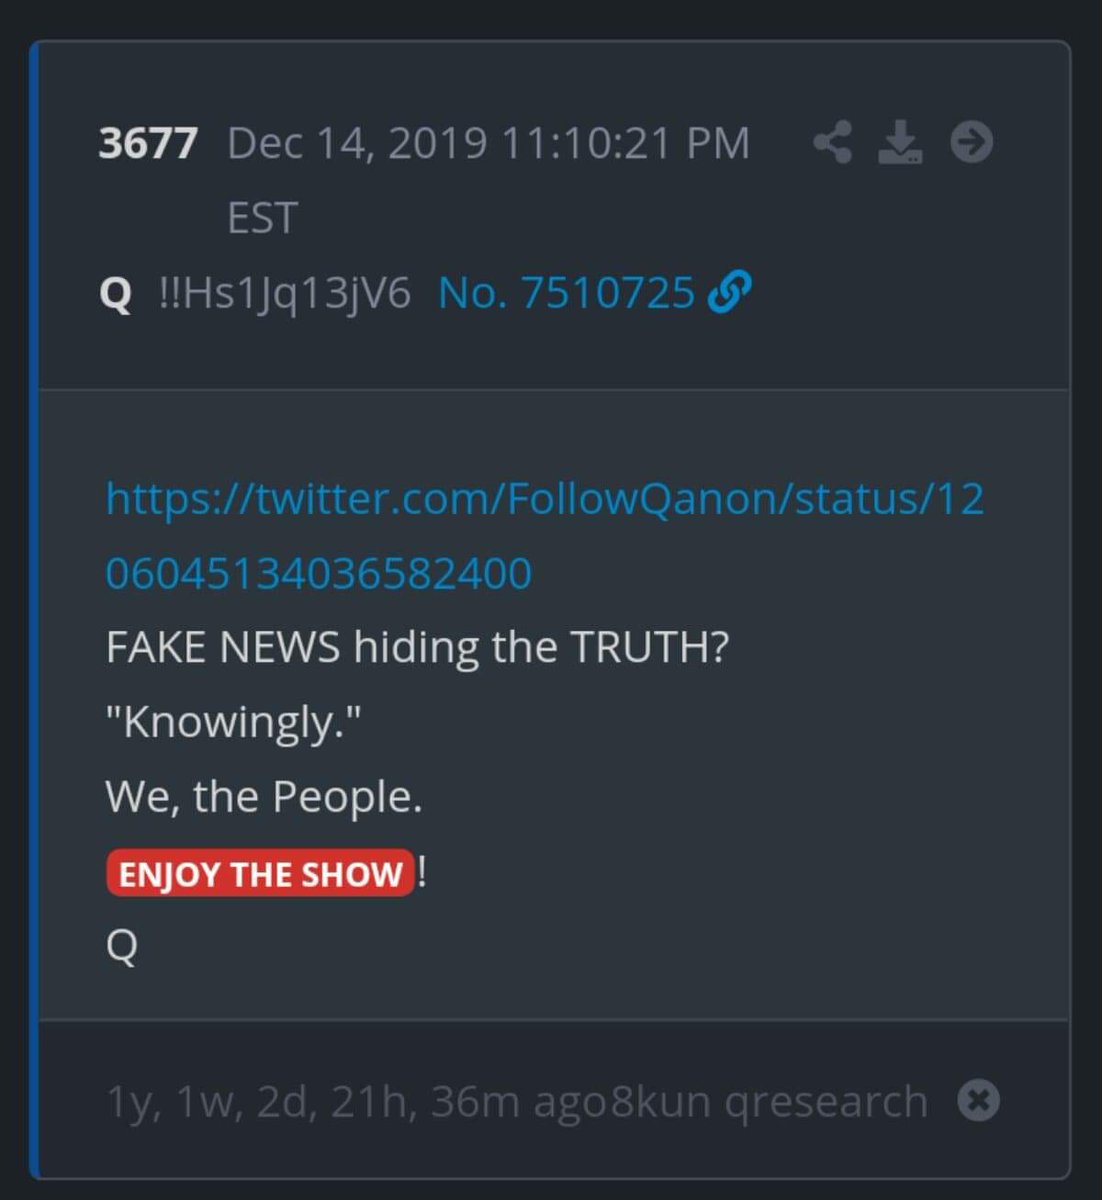 Do you believe in coincidences? At what point does it become statistically impossible? We have it all Patriots. Get some popcorn. Enjoy the show. There should be no more doubt.